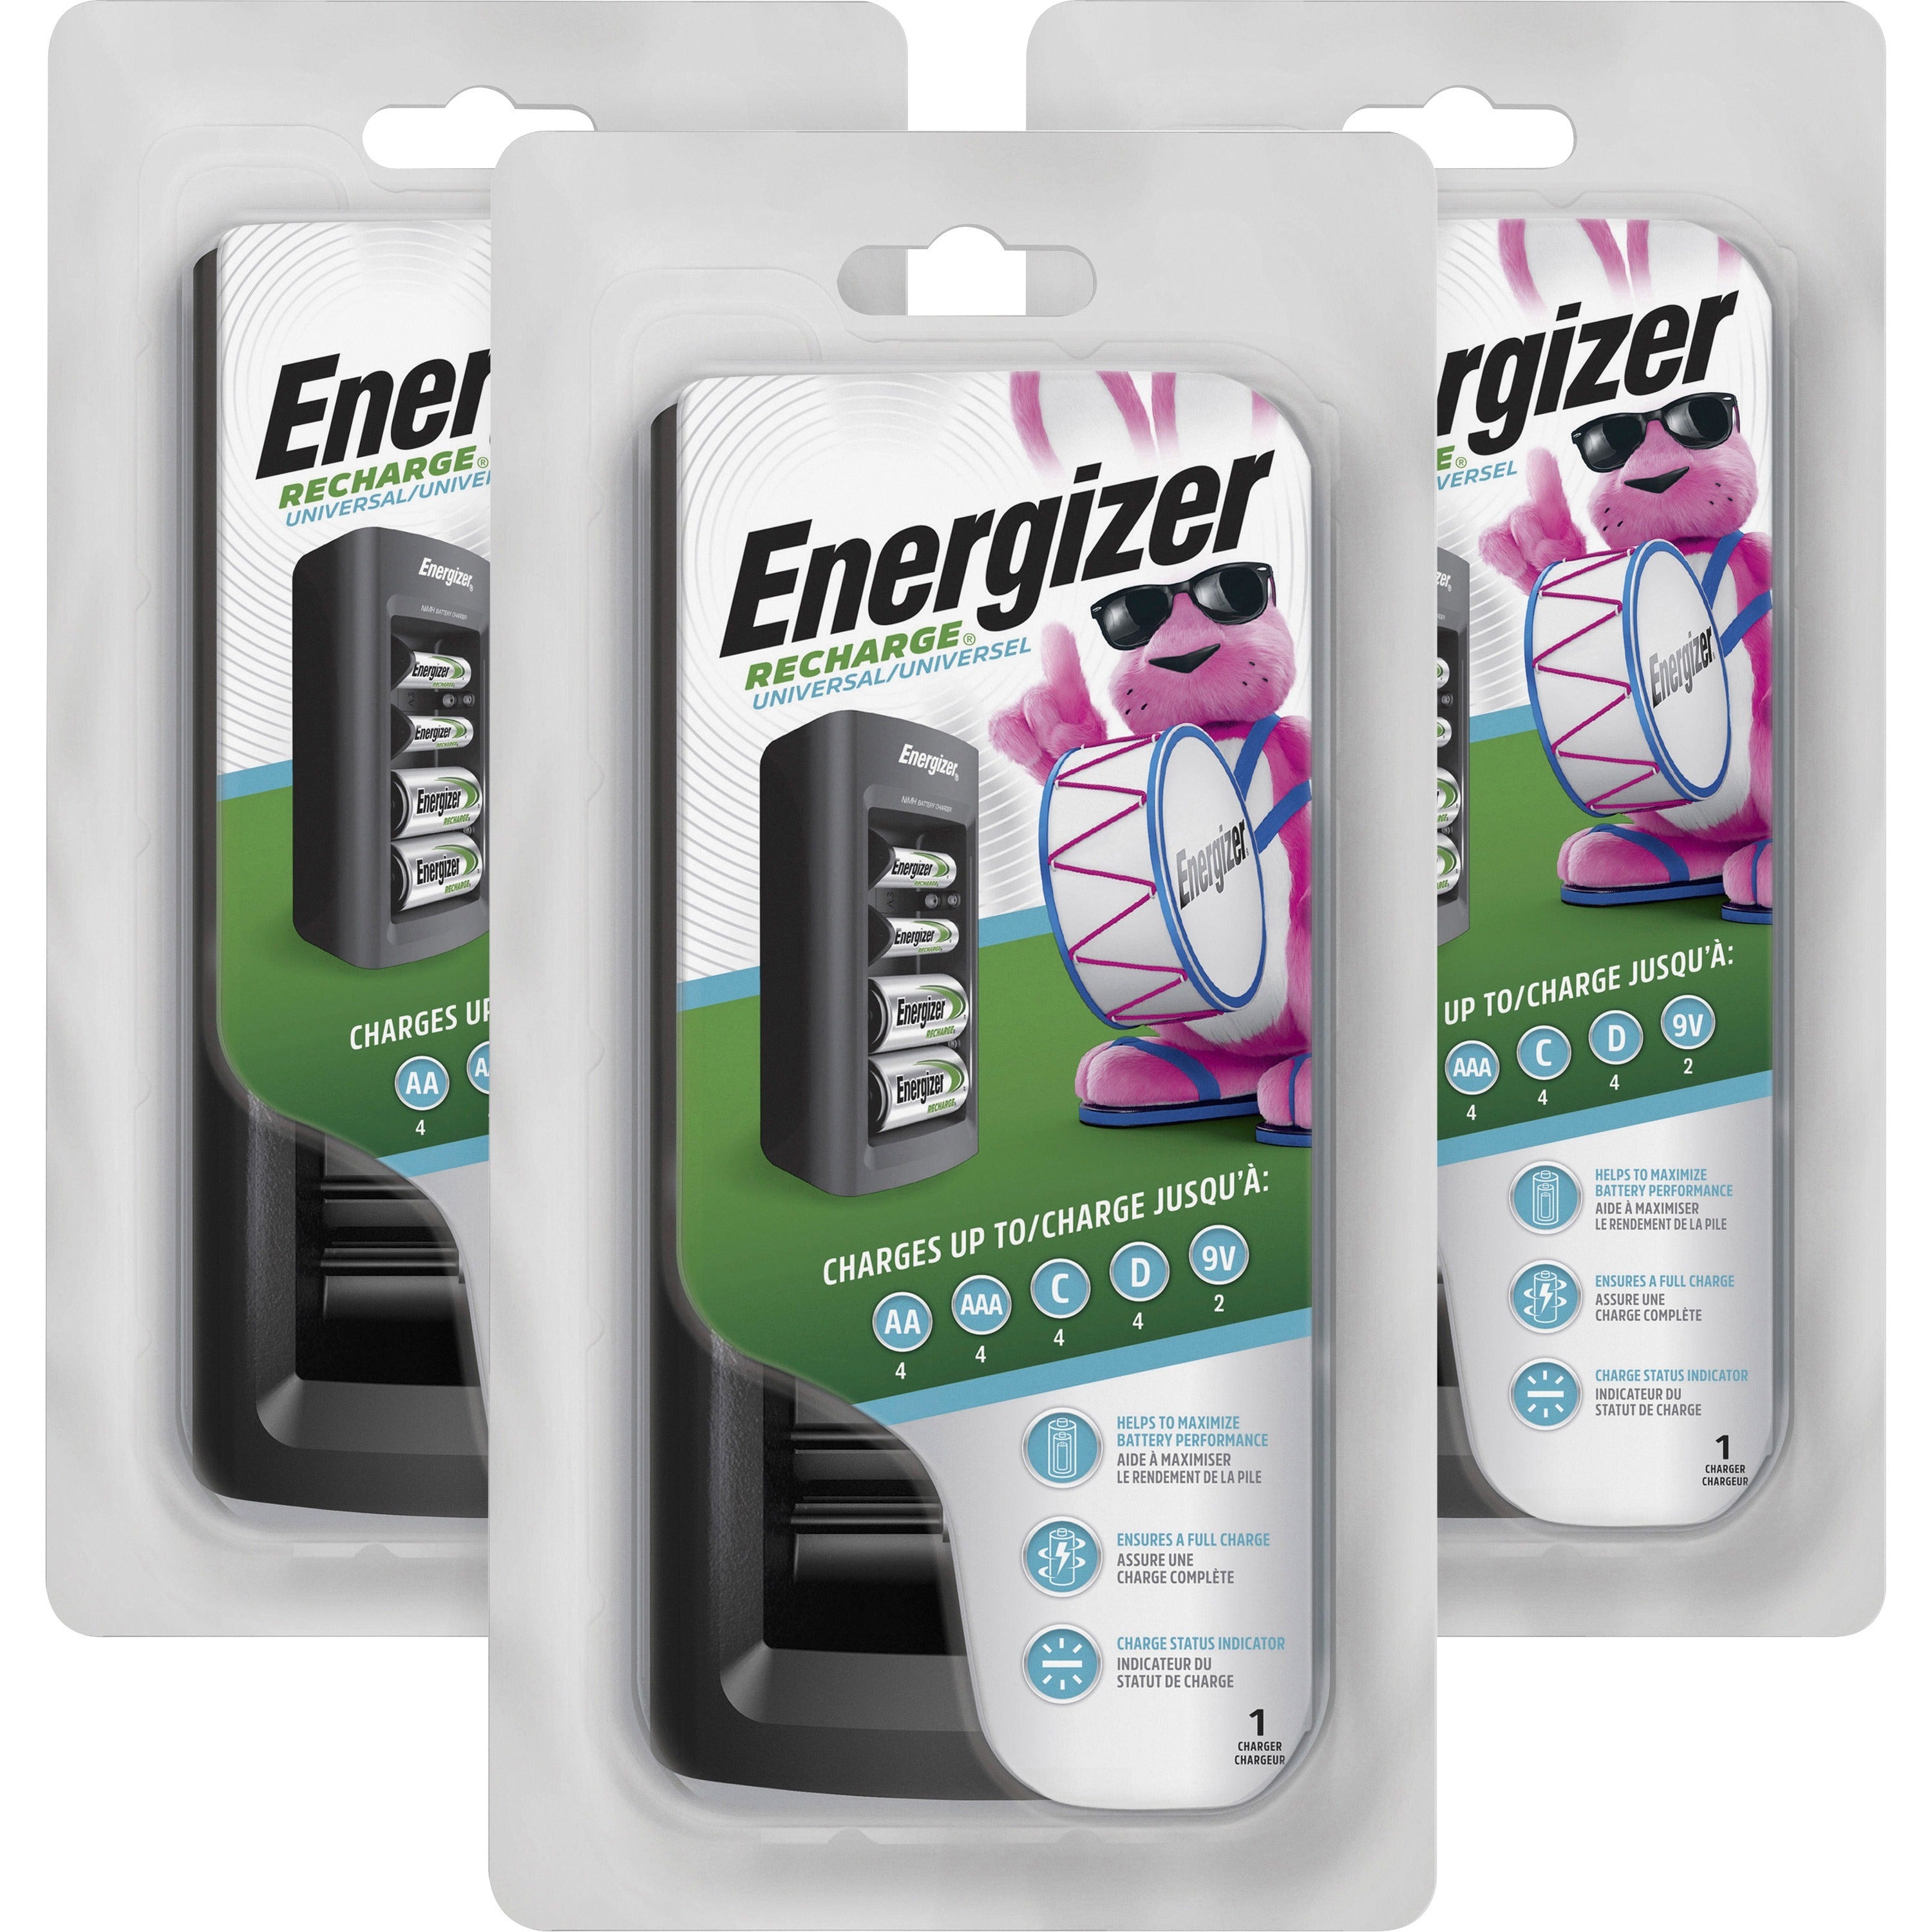 energizer-recharge-universal-chargers-3-carton-6-hour-chargingaa-aaa-c-d-9v_evechfcct - 1